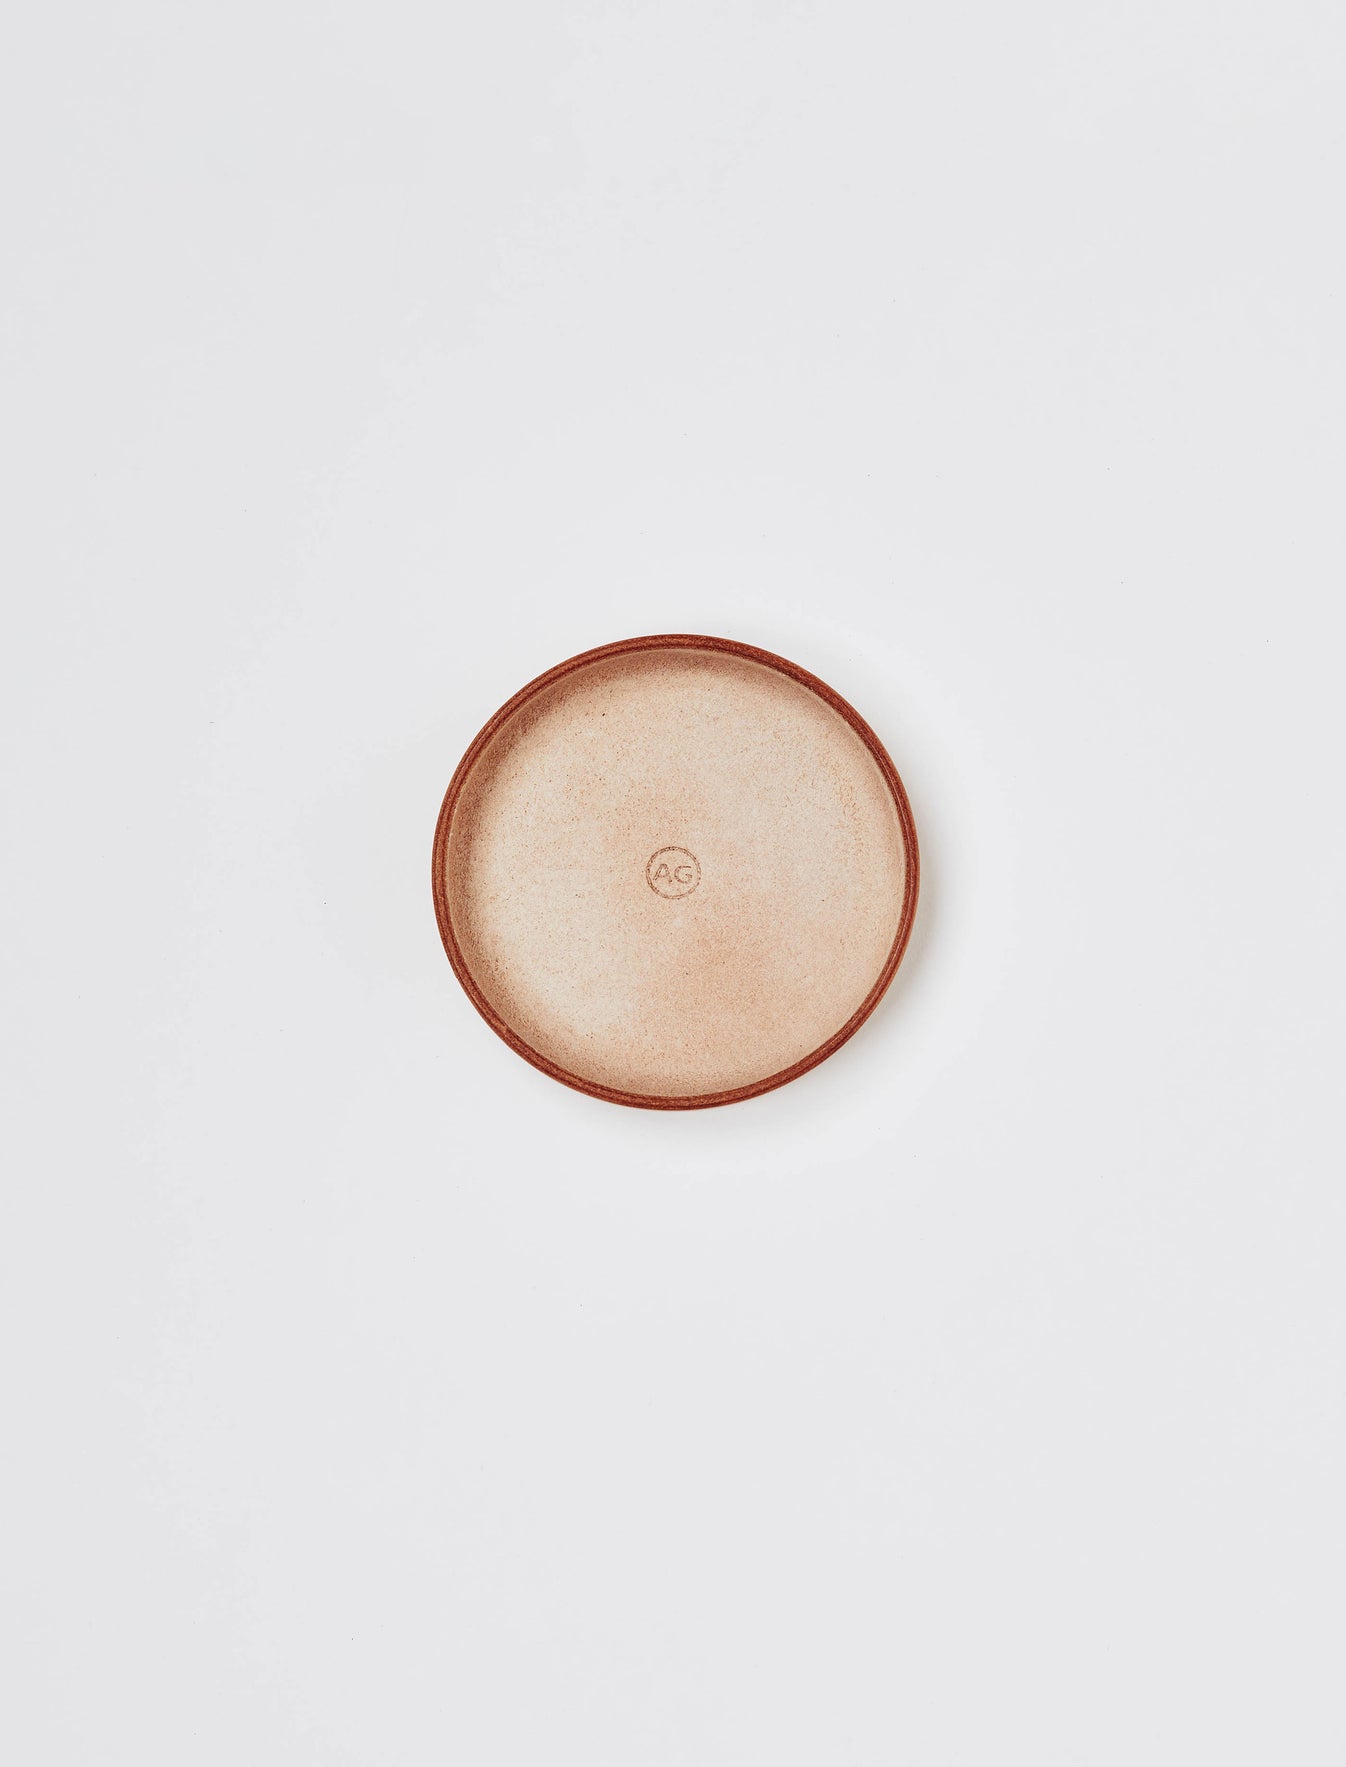 Ag Leather Tray Natural Tan Round Leather Tray Unisex Accessory Photo 2